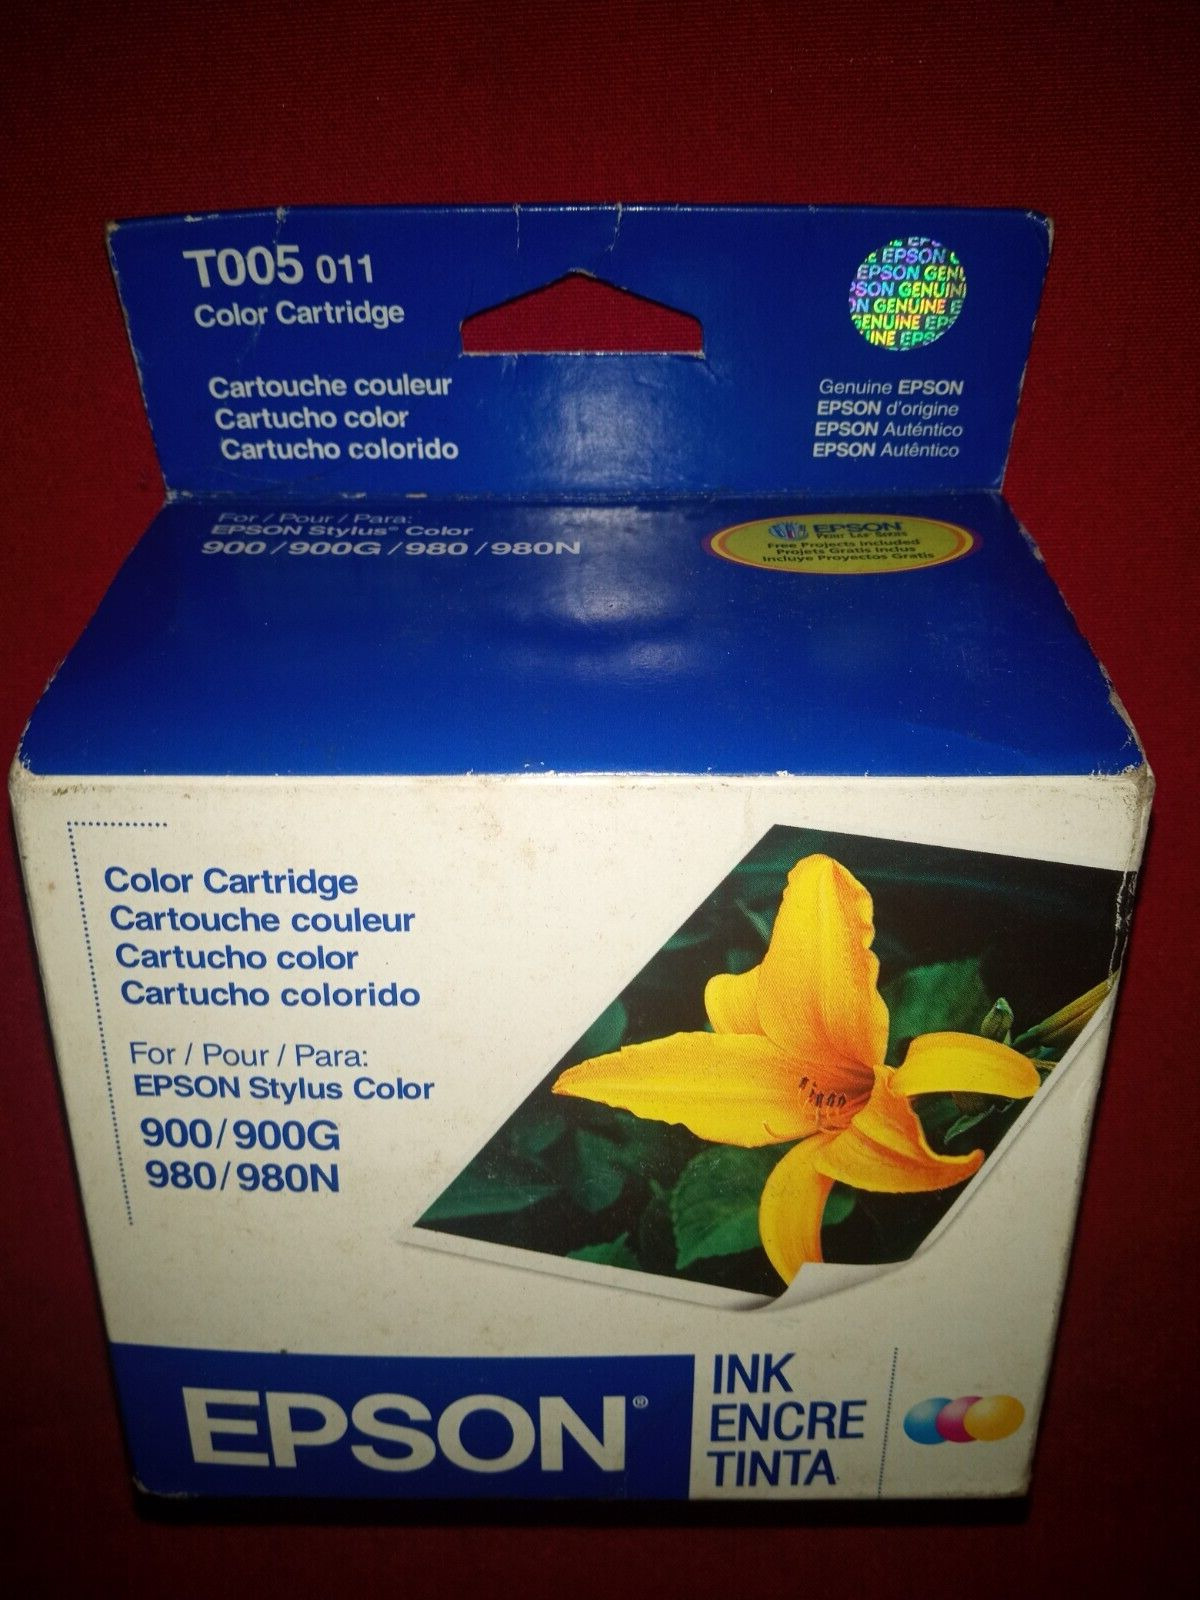 Genuine Epson Stylus T005/T005001 Color Ink Cartridge EXPIRED 7/2004 READ INFO